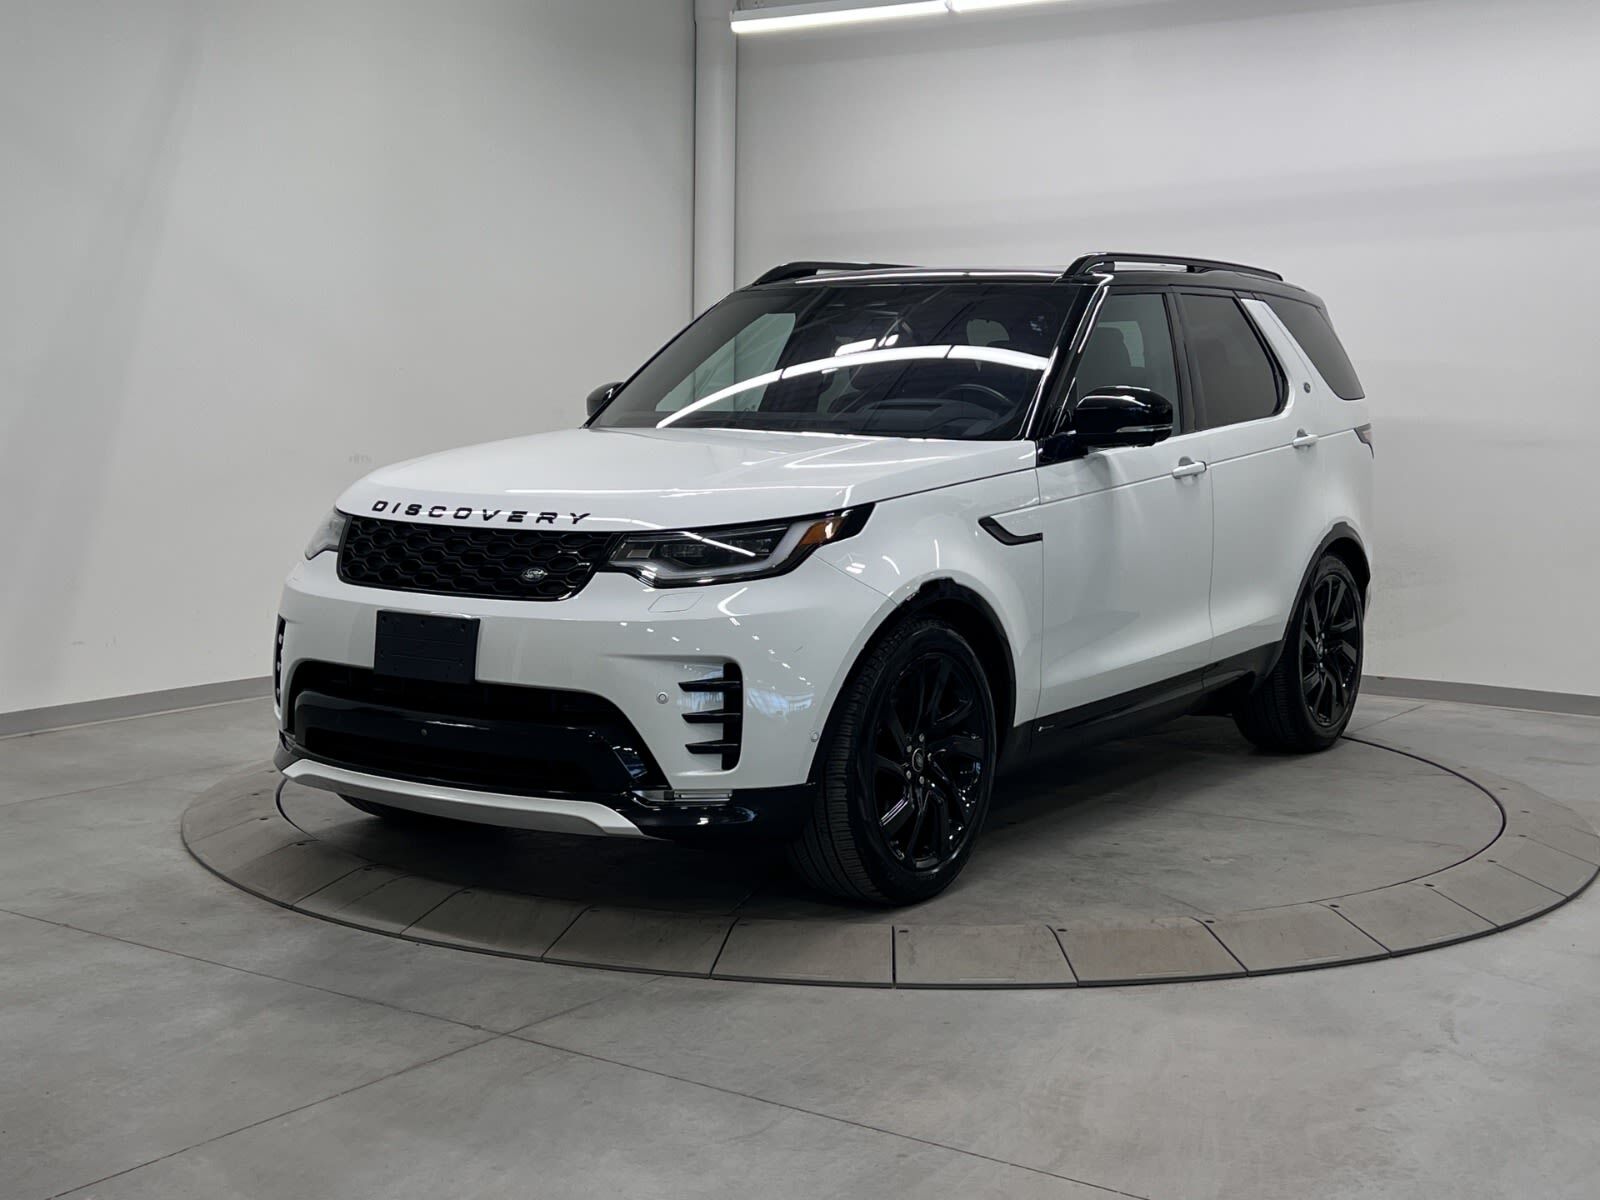 2021 Land Rover Discovery CERTIFIED PRE OWNED RATES AS LOW AS 4.99%